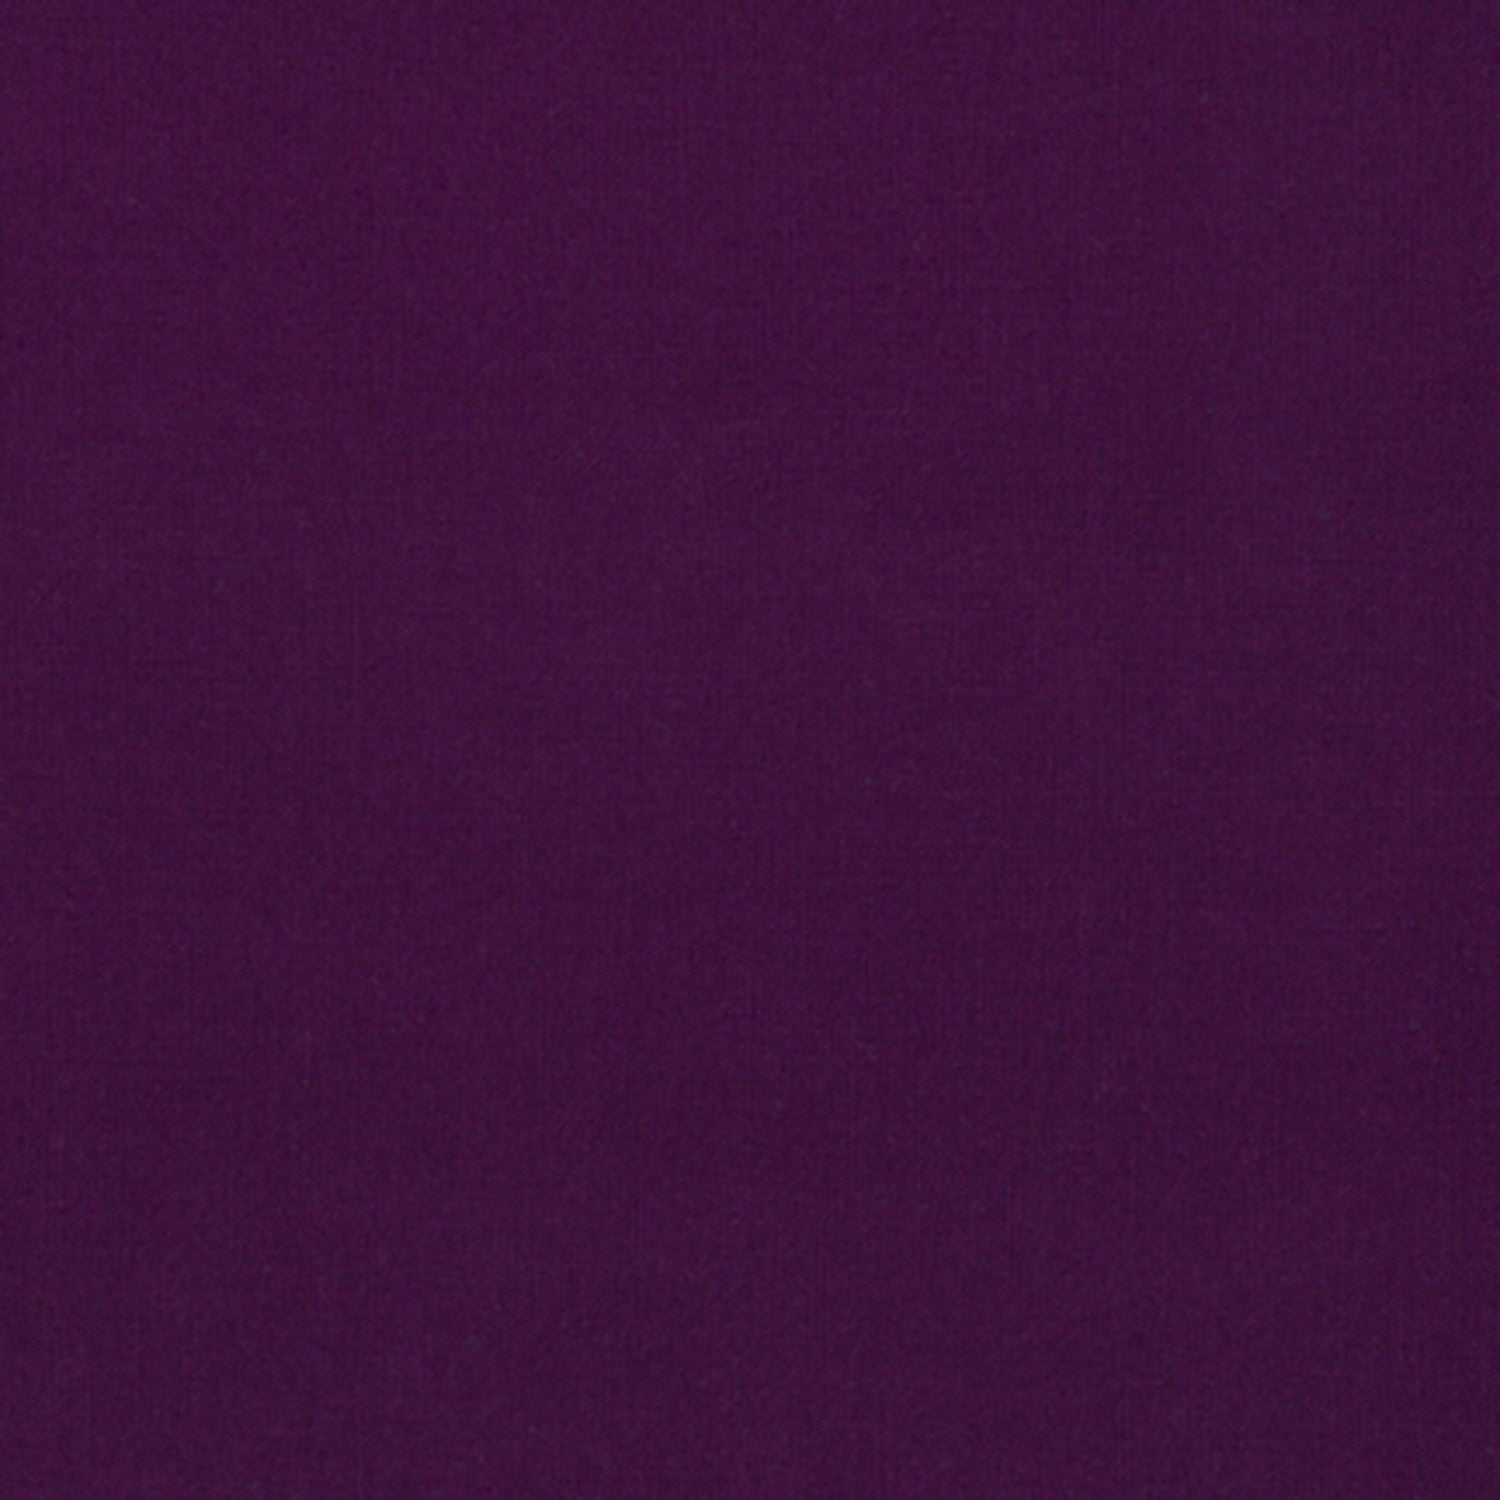 Kona Cotton Solids Eggplant fabric thumbnail image for true color reference